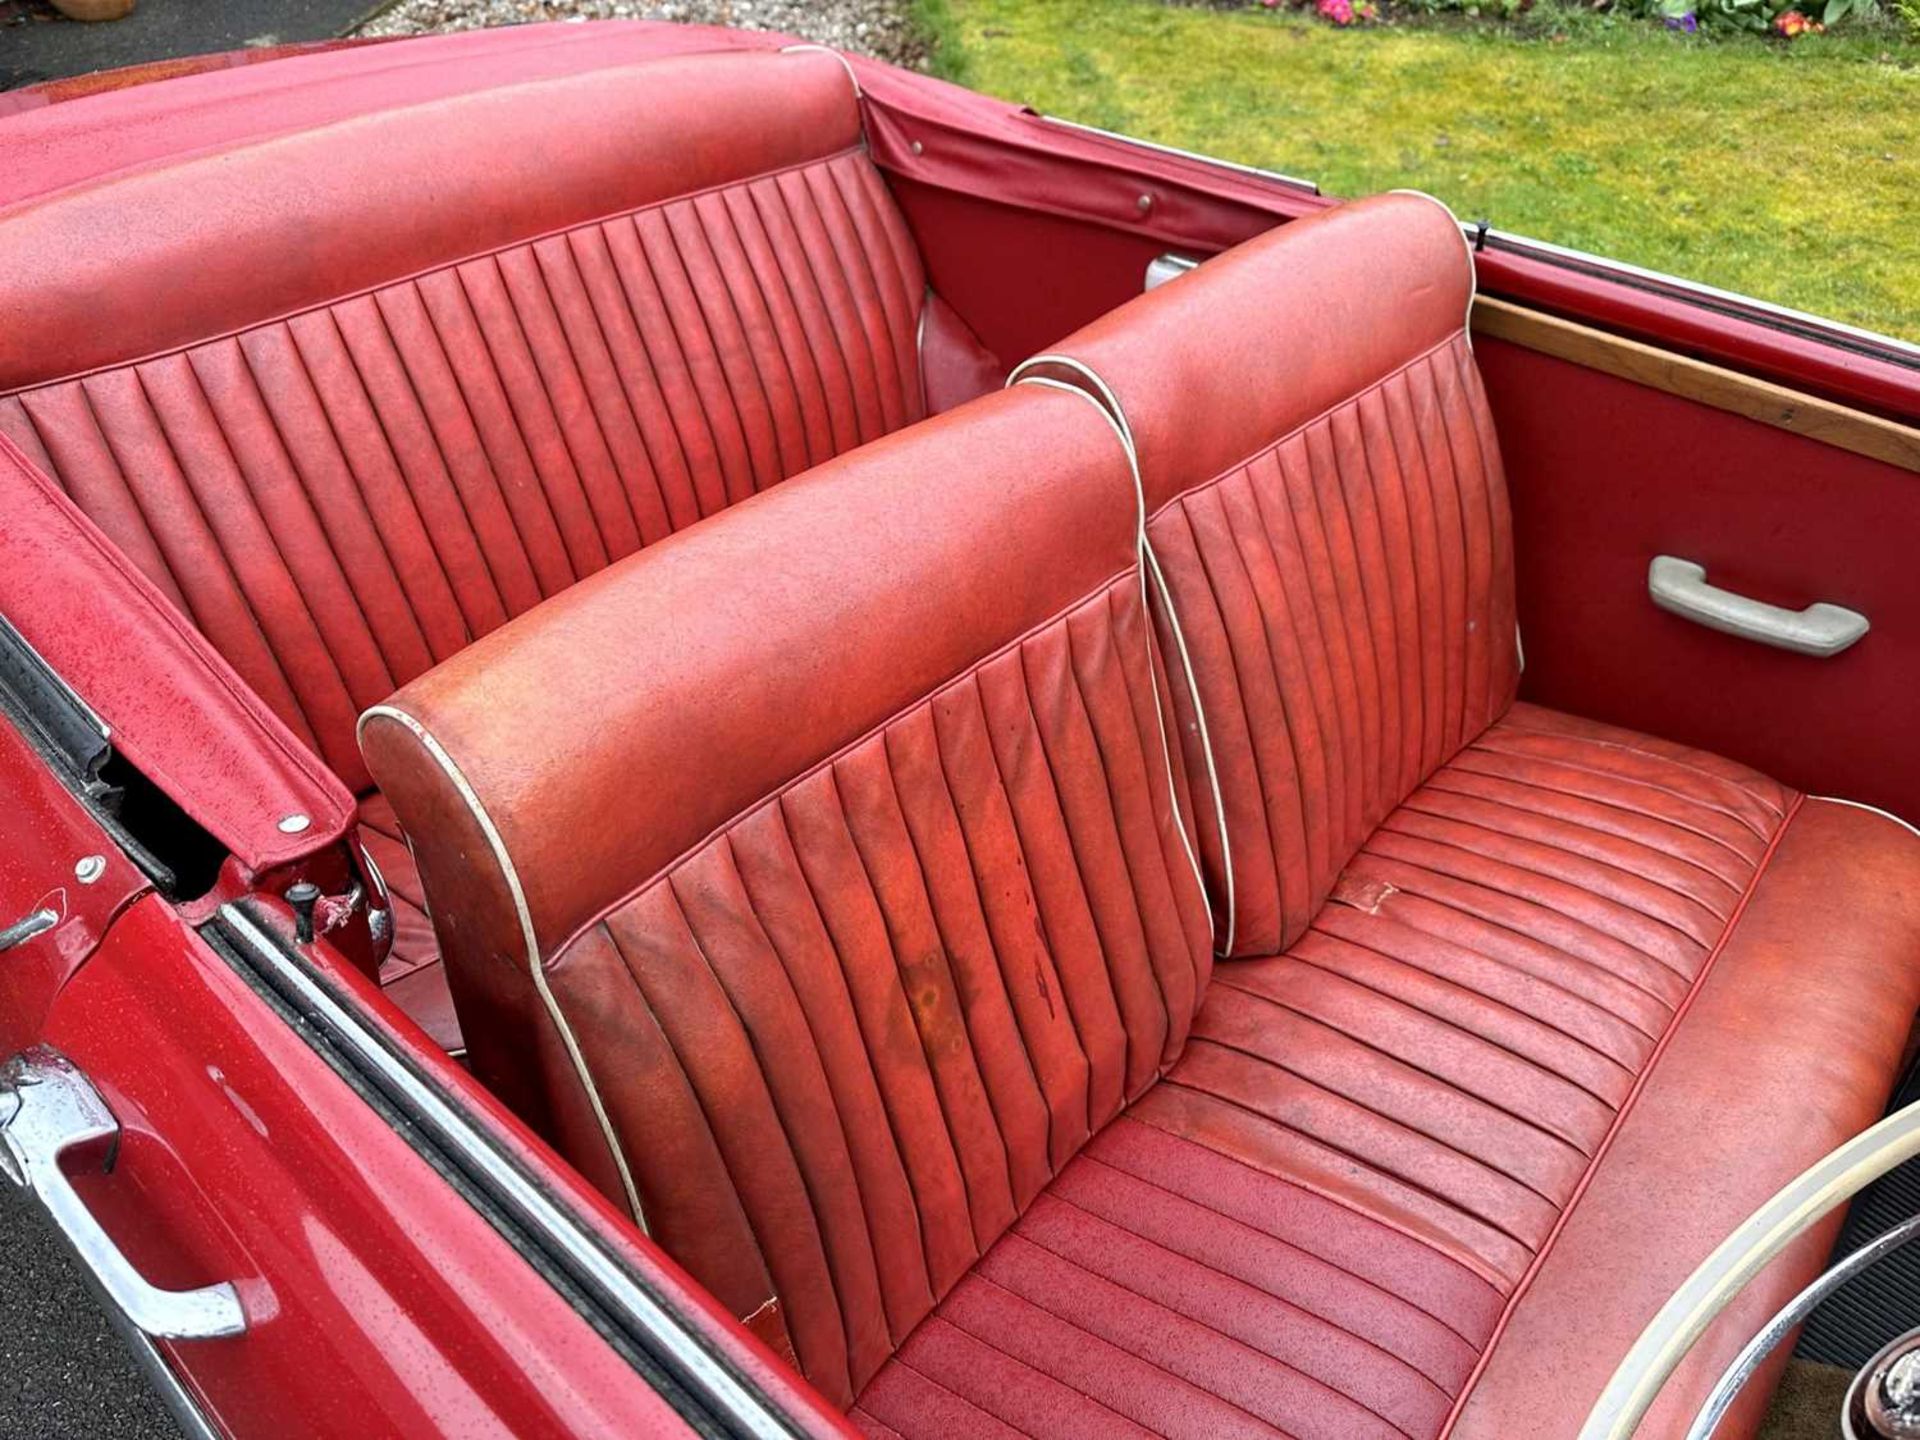 1961 Singer Gazelle Convertible Comes complete with overdrive, period radio and badge bar - Image 56 of 95